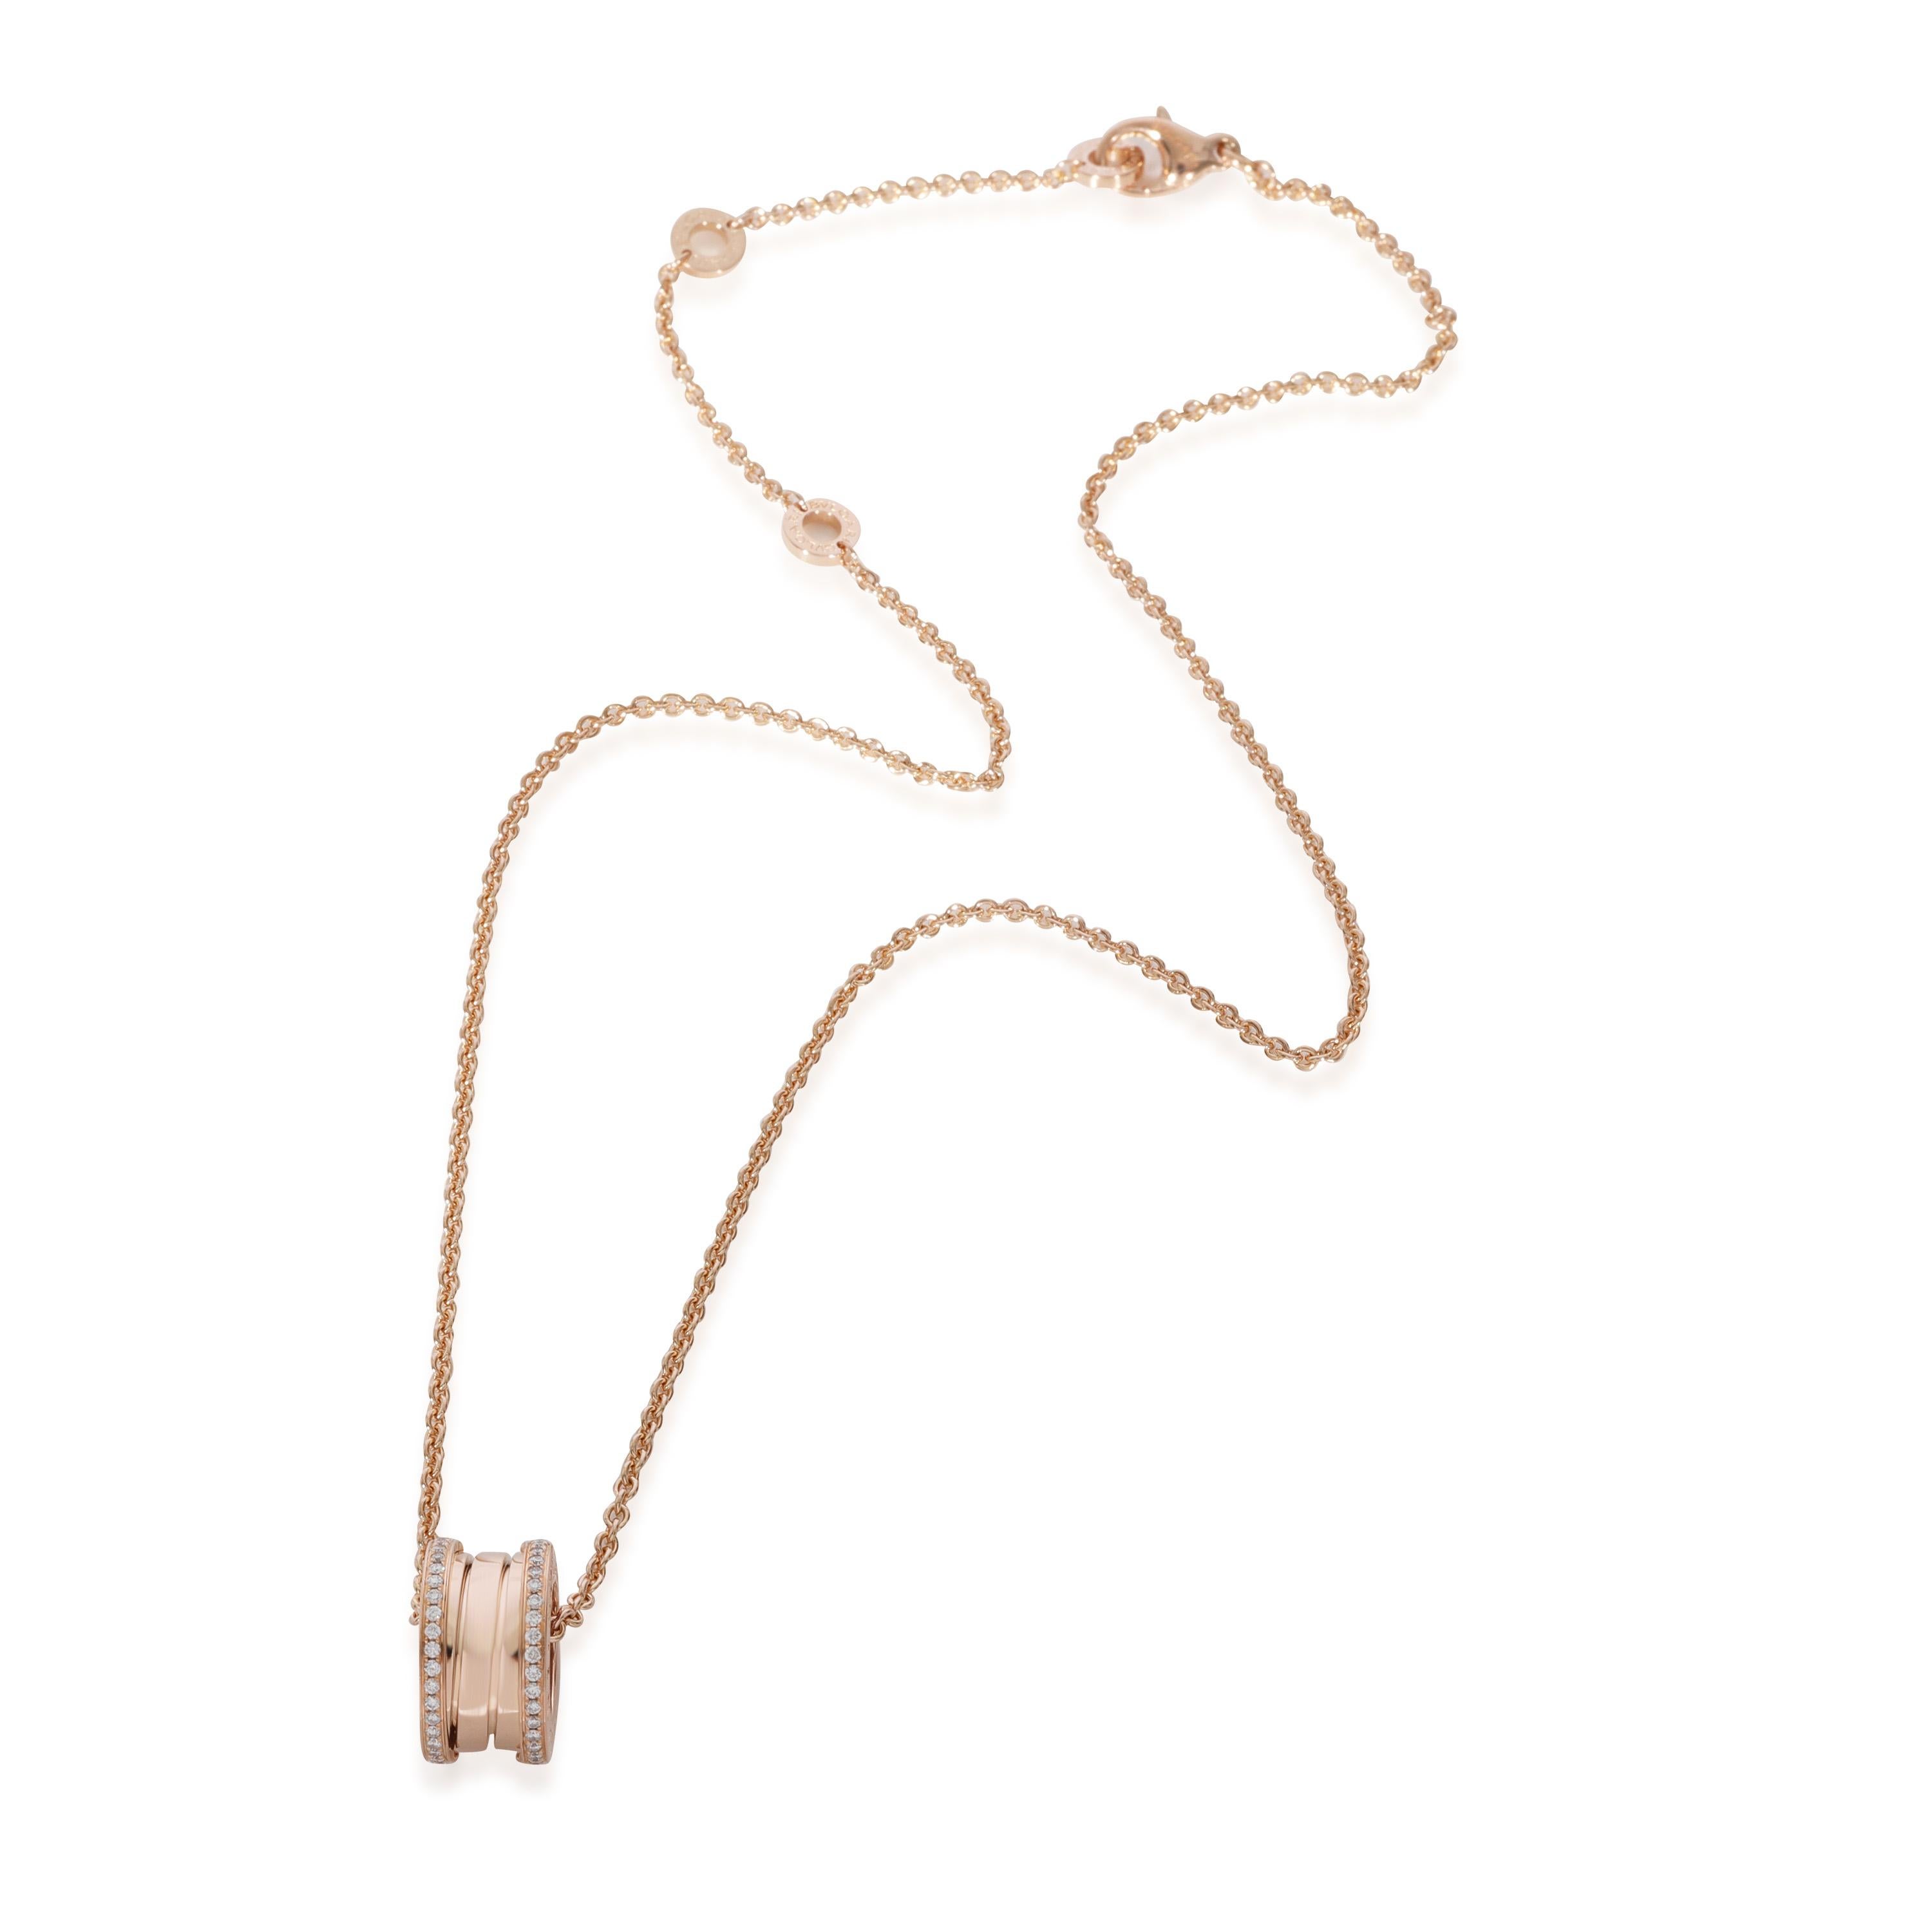 BVLGARI B.zero1 Diamond Pendant in 18k Rose Gold 0.38 CTW

PRIMARY DETAILS
SKU: 127525
Listing Title: BVLGARI B.zero1 Diamond Pendant in 18k Rose Gold 0.38 CTW
Condition Description: Retails for 8850 USD. In excellent condition and recently